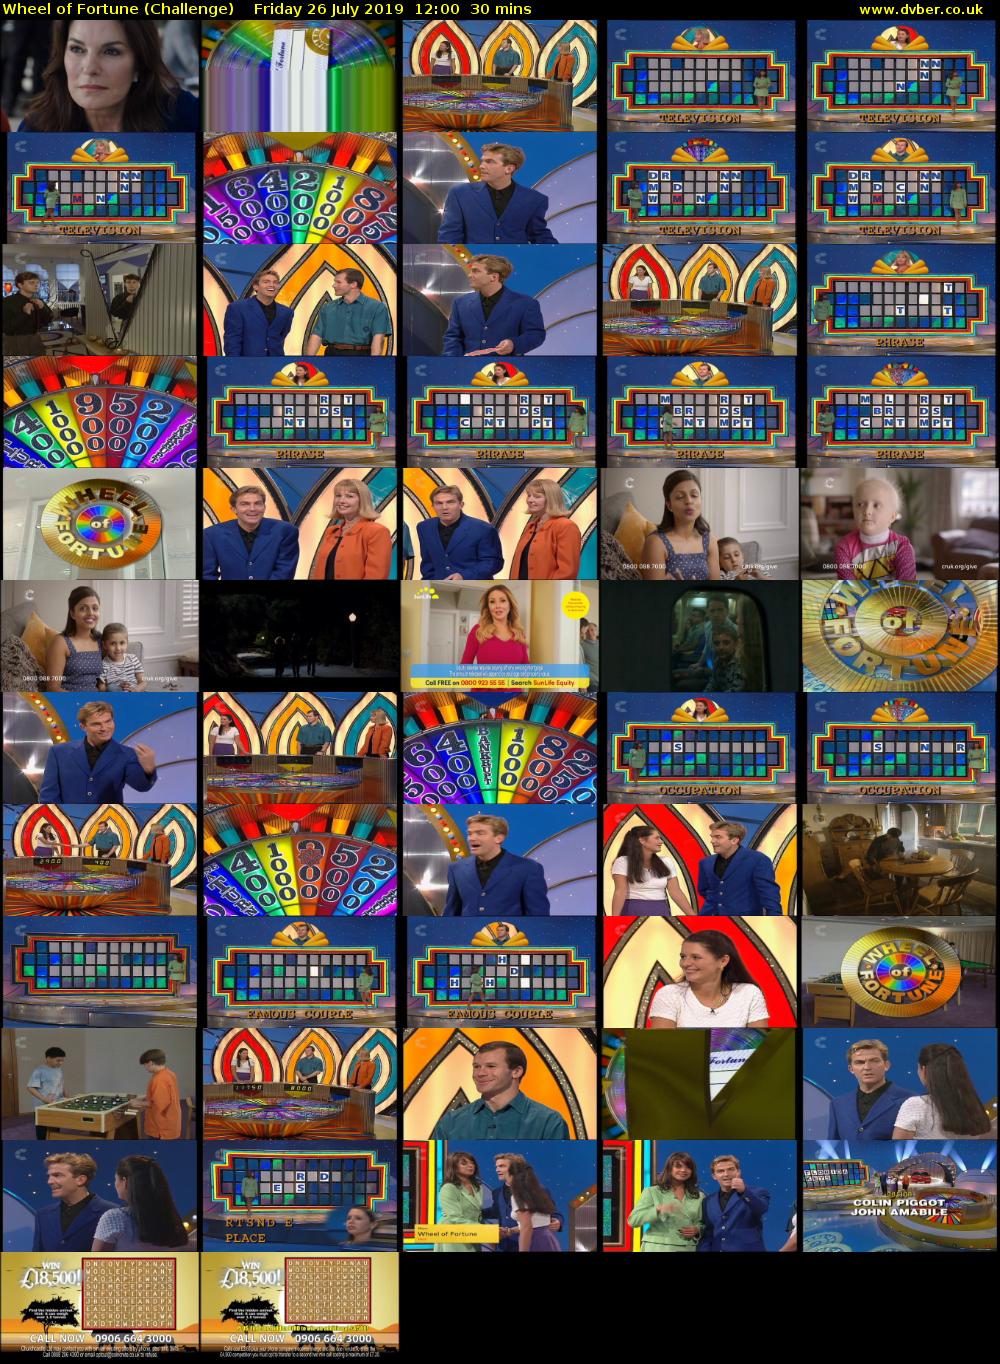 Wheel of Fortune (Challenge) Friday 26 July 2019 12:00 - 12:30